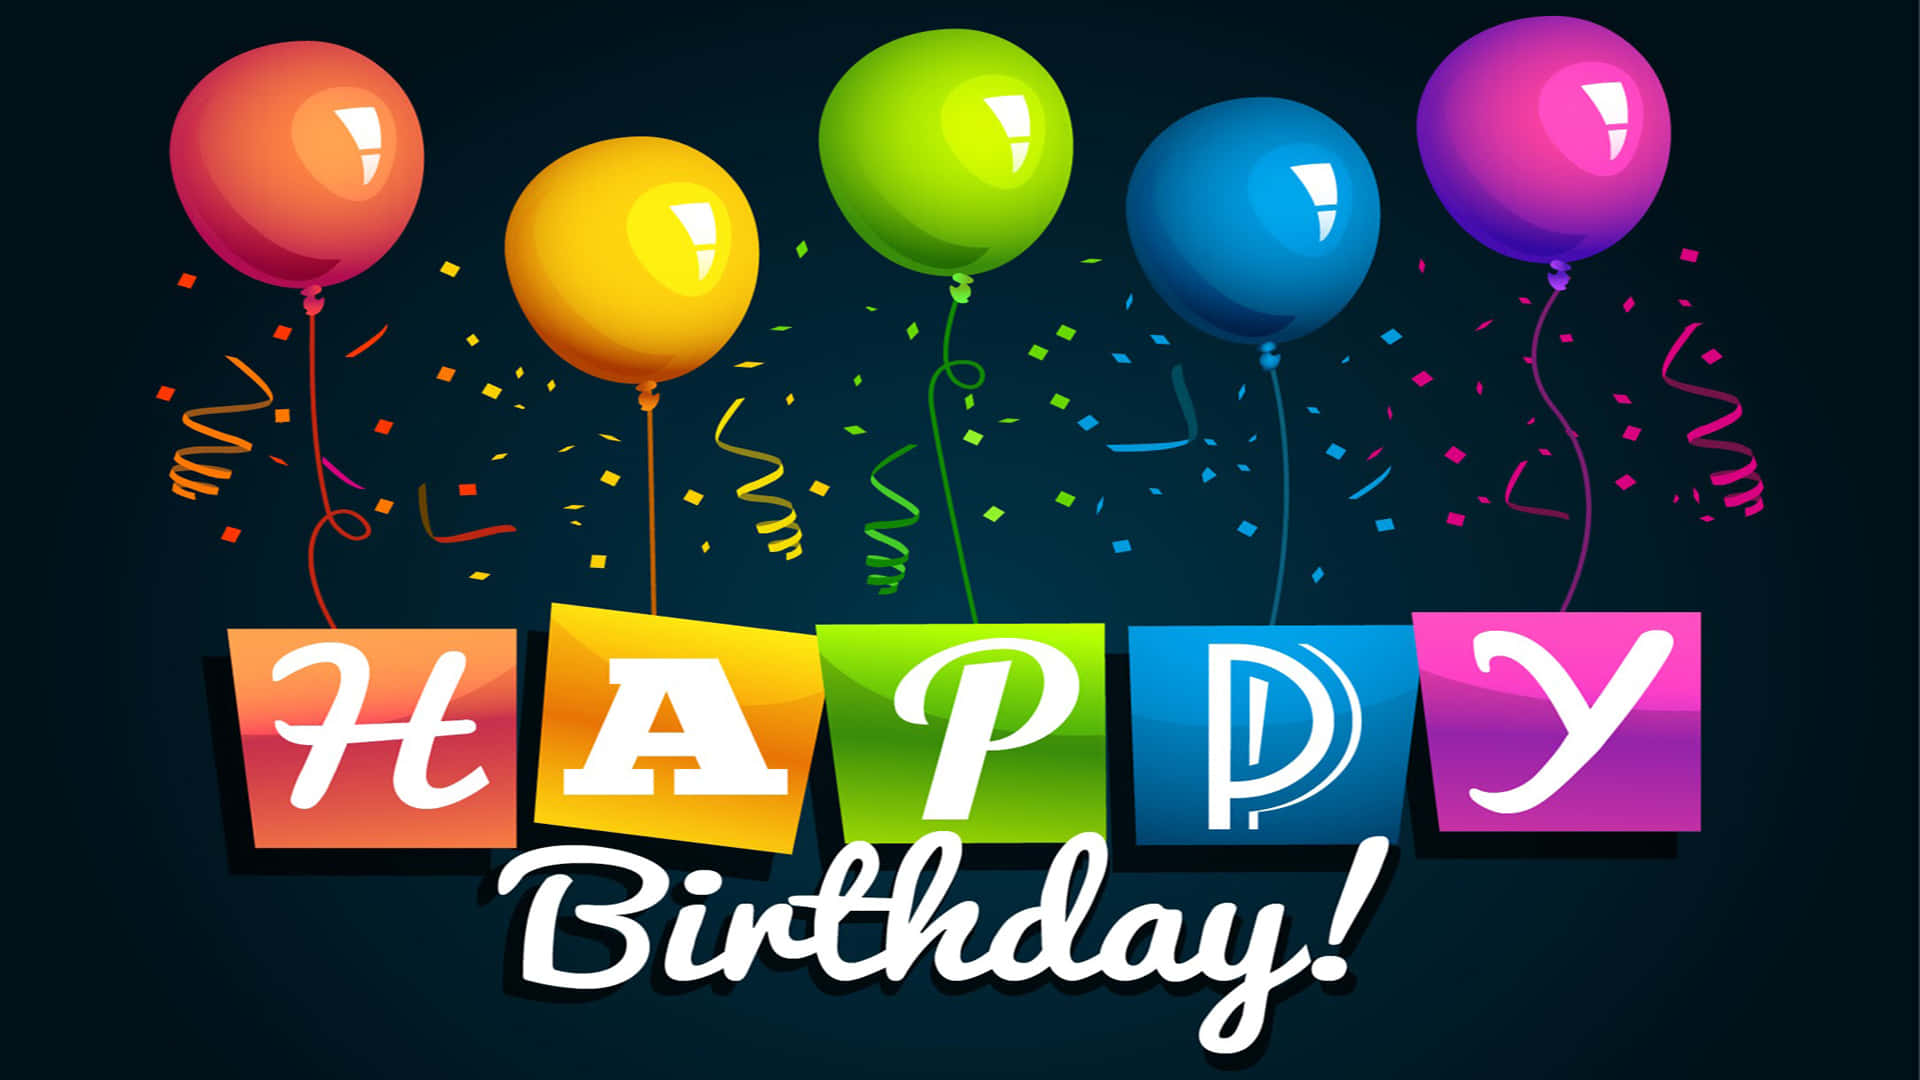 Happy Birthday! Celebrate with a beautiful high resolution background